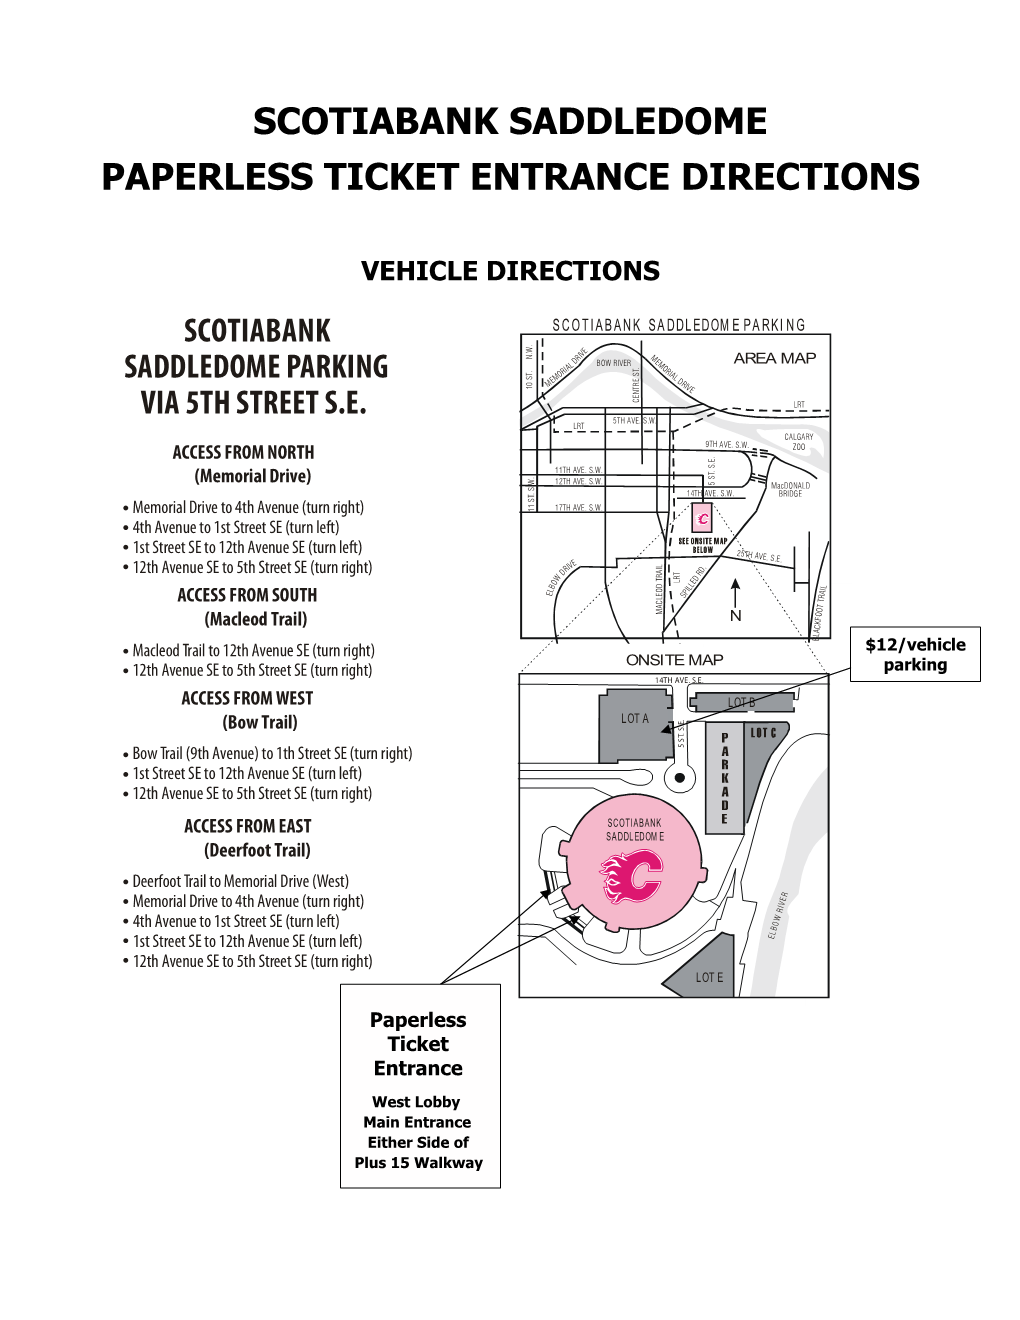 6&27,$%$1. Saddledome Paperless Ticket Entrance Directions